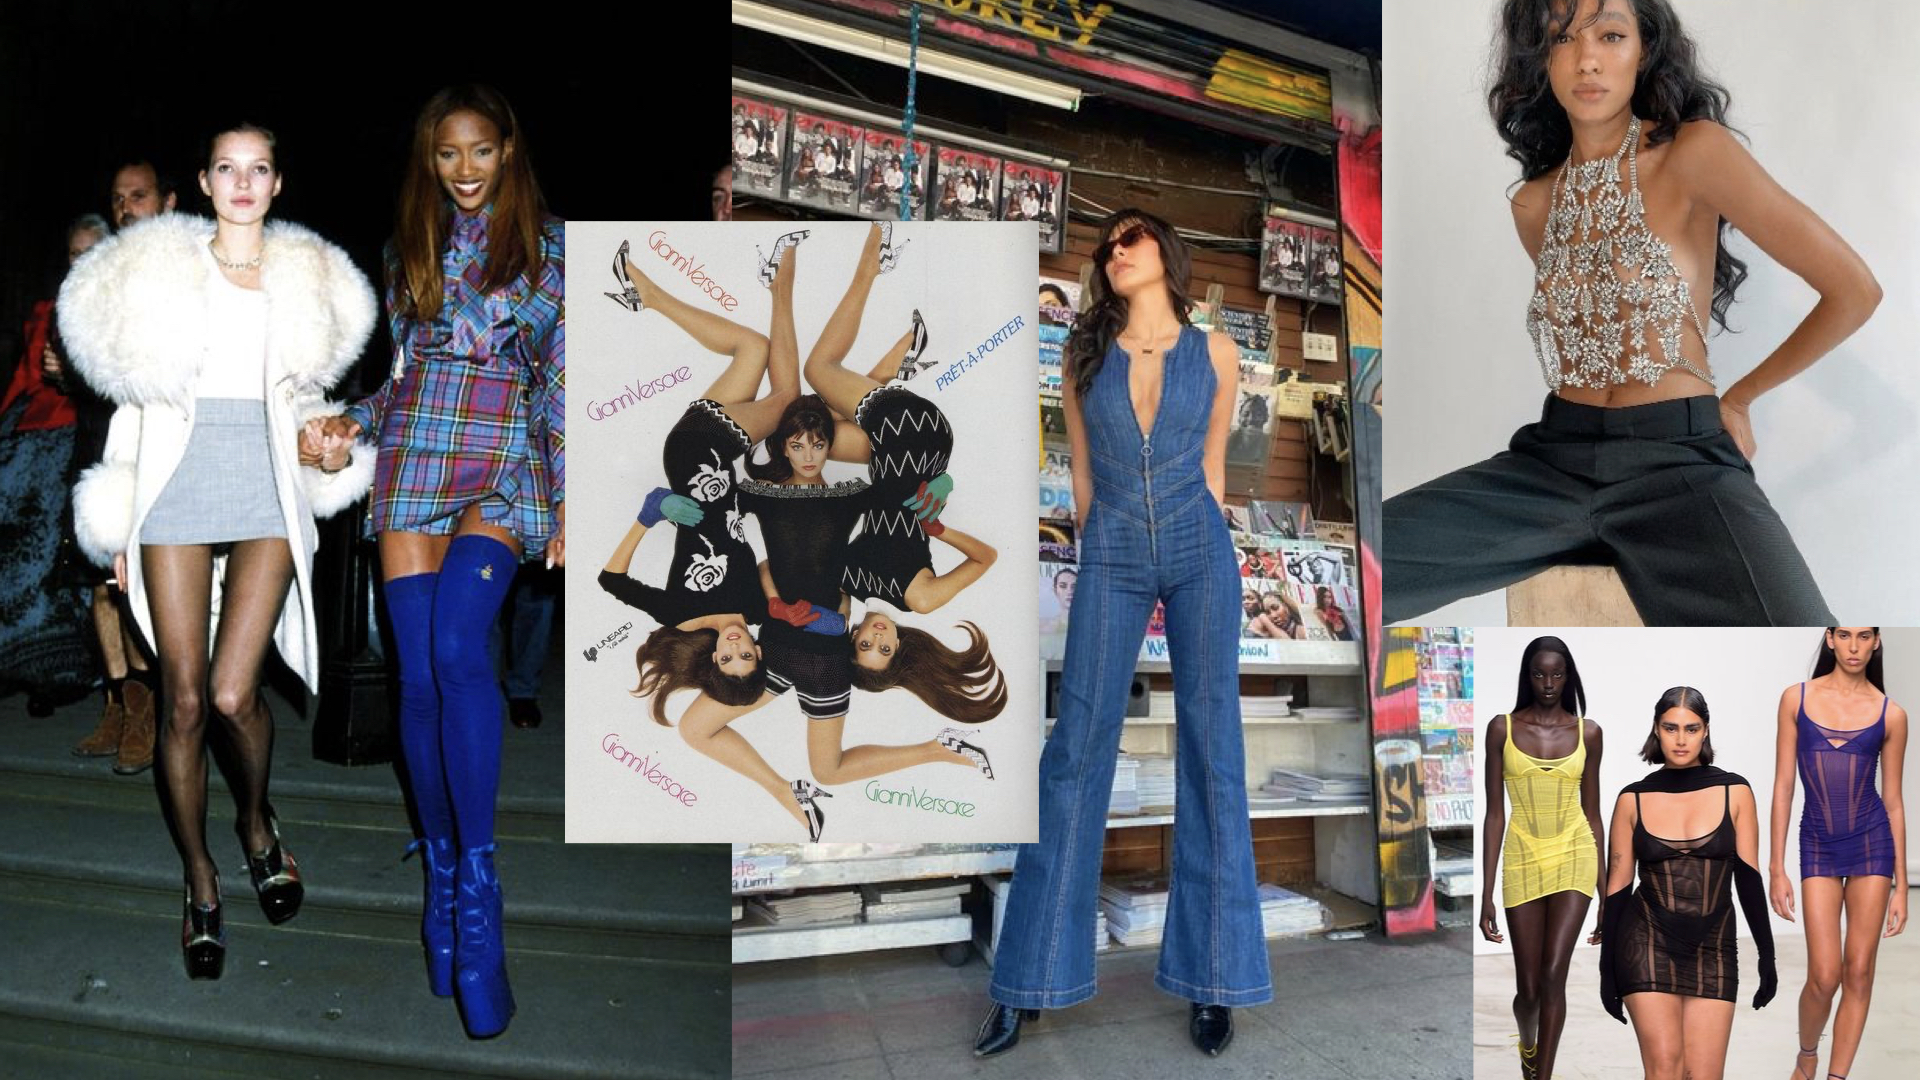 5 Women Who Make Us Want To Work In Fashion